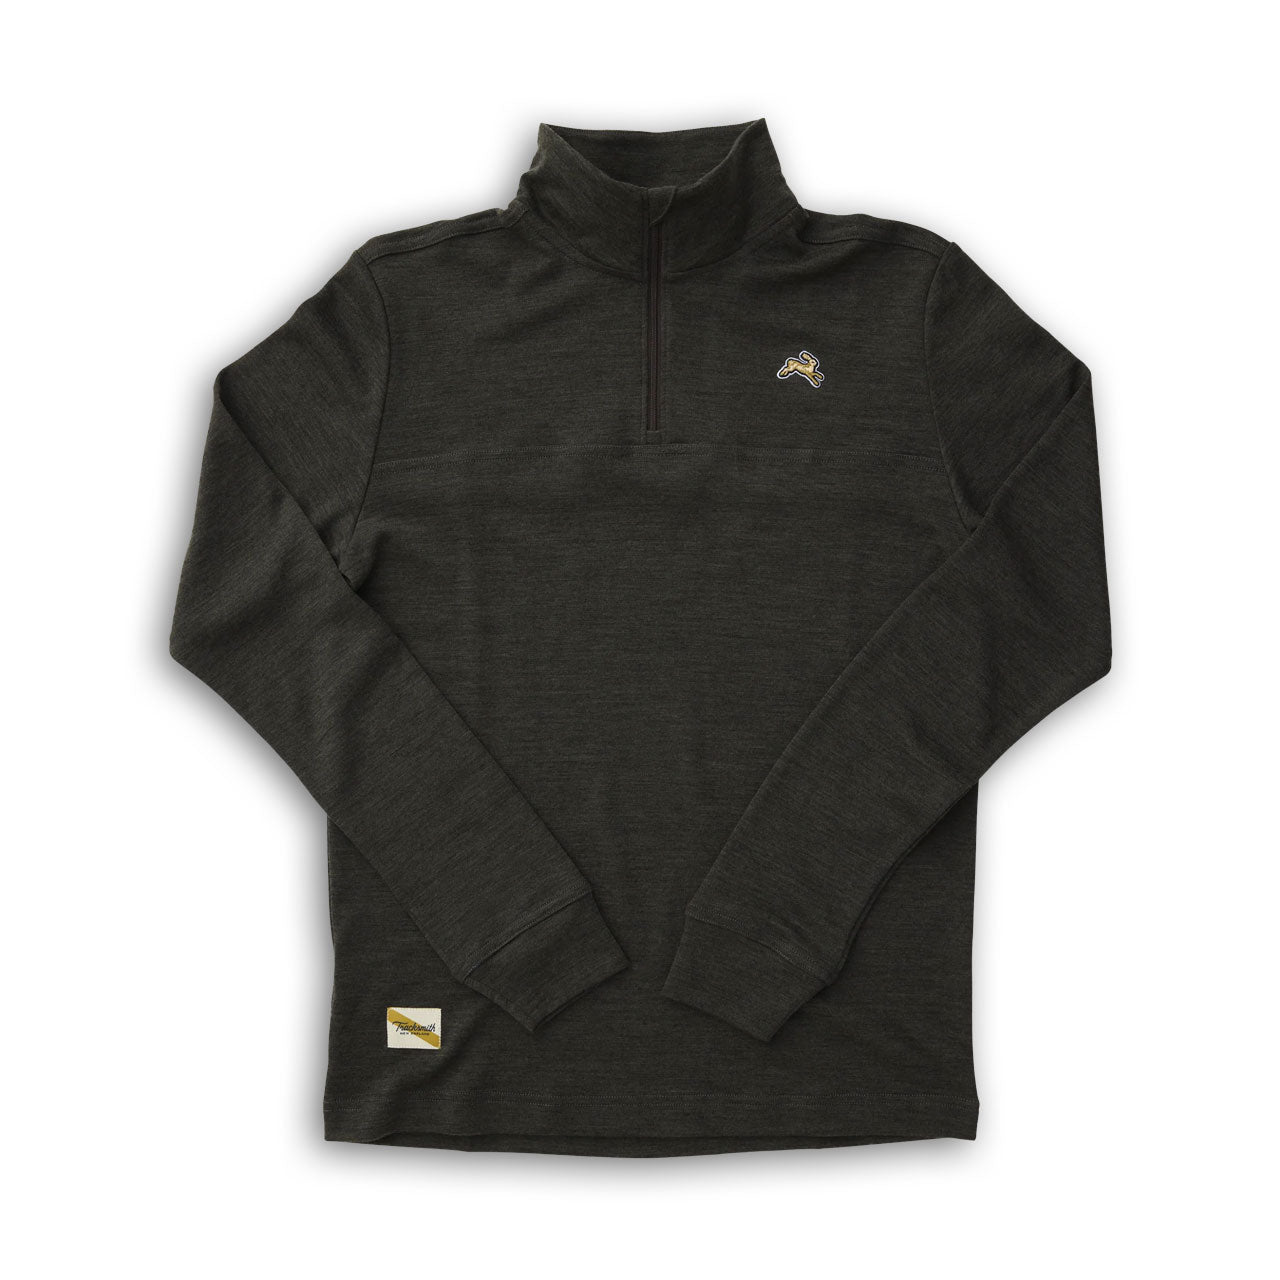 Tracksmith Downeaster Running Pull Over